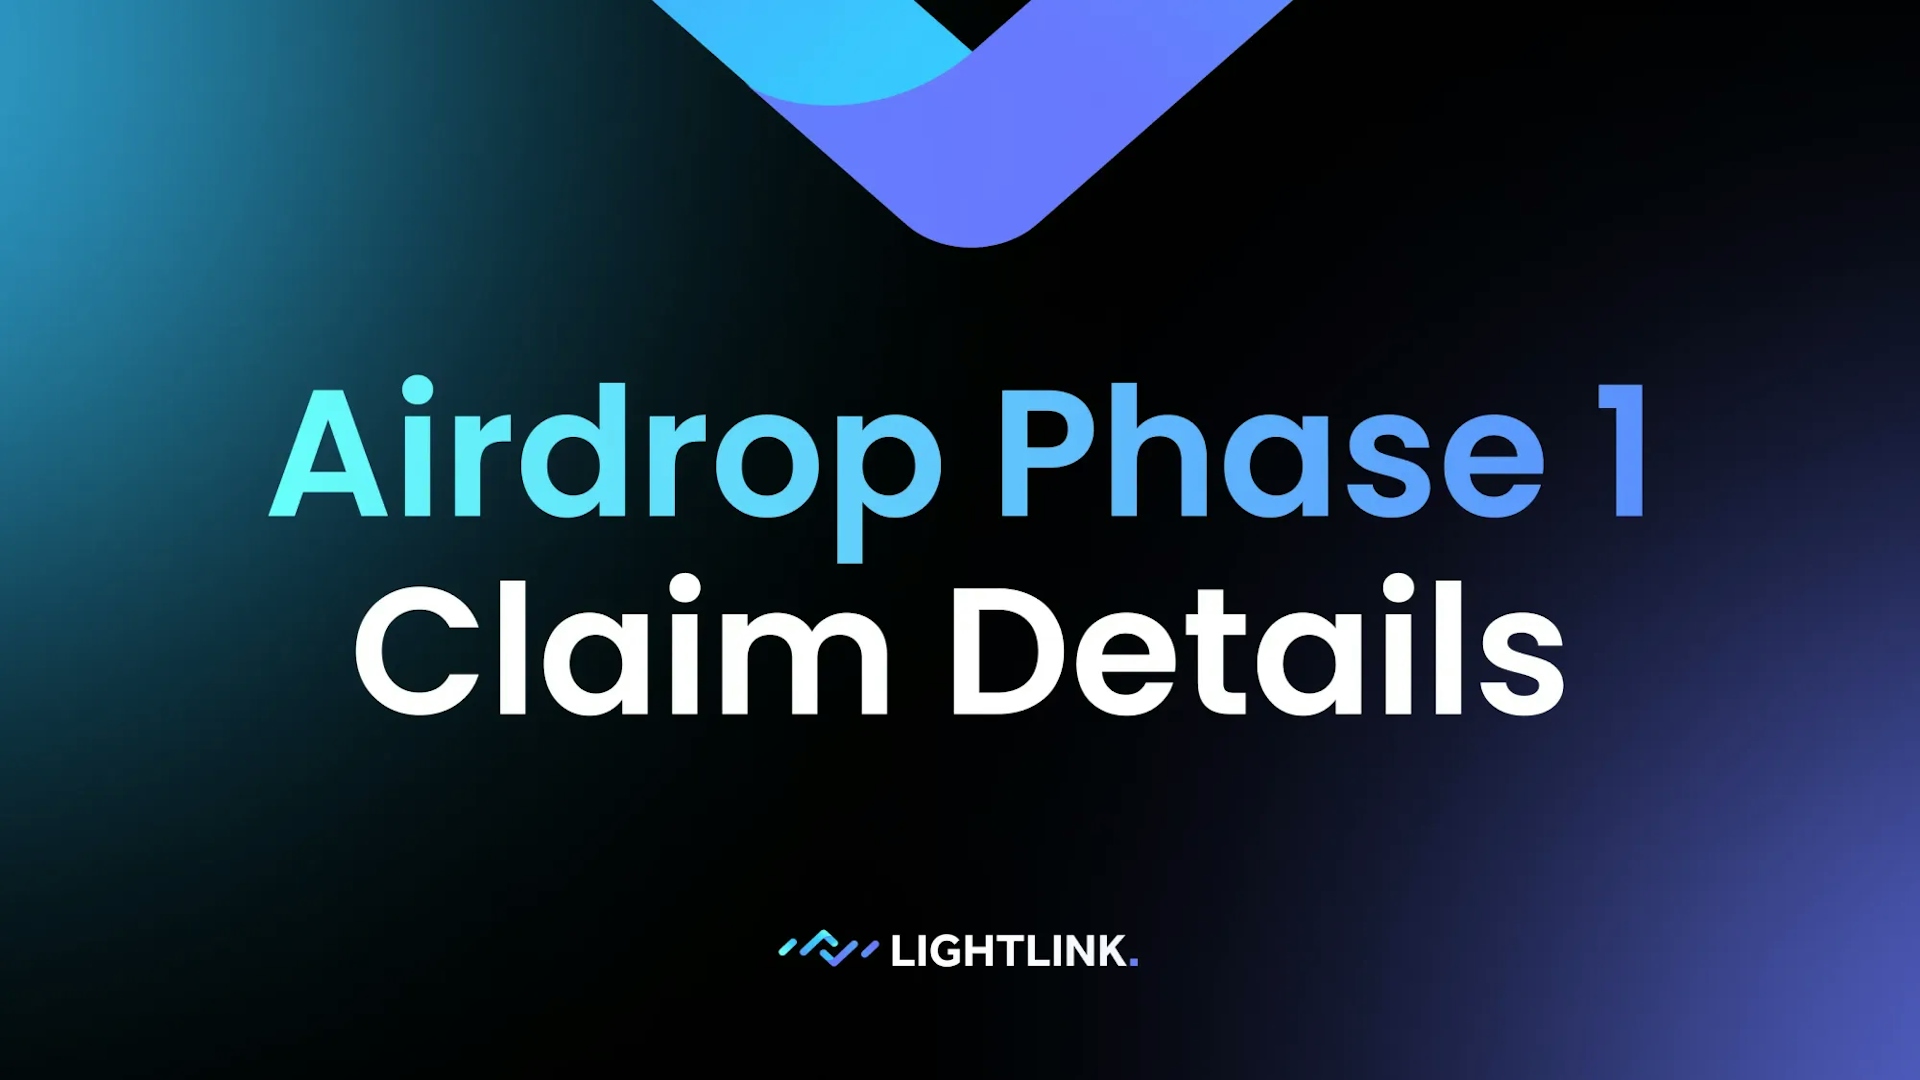 Community Airdrop Phase 1 Claim Details Announced